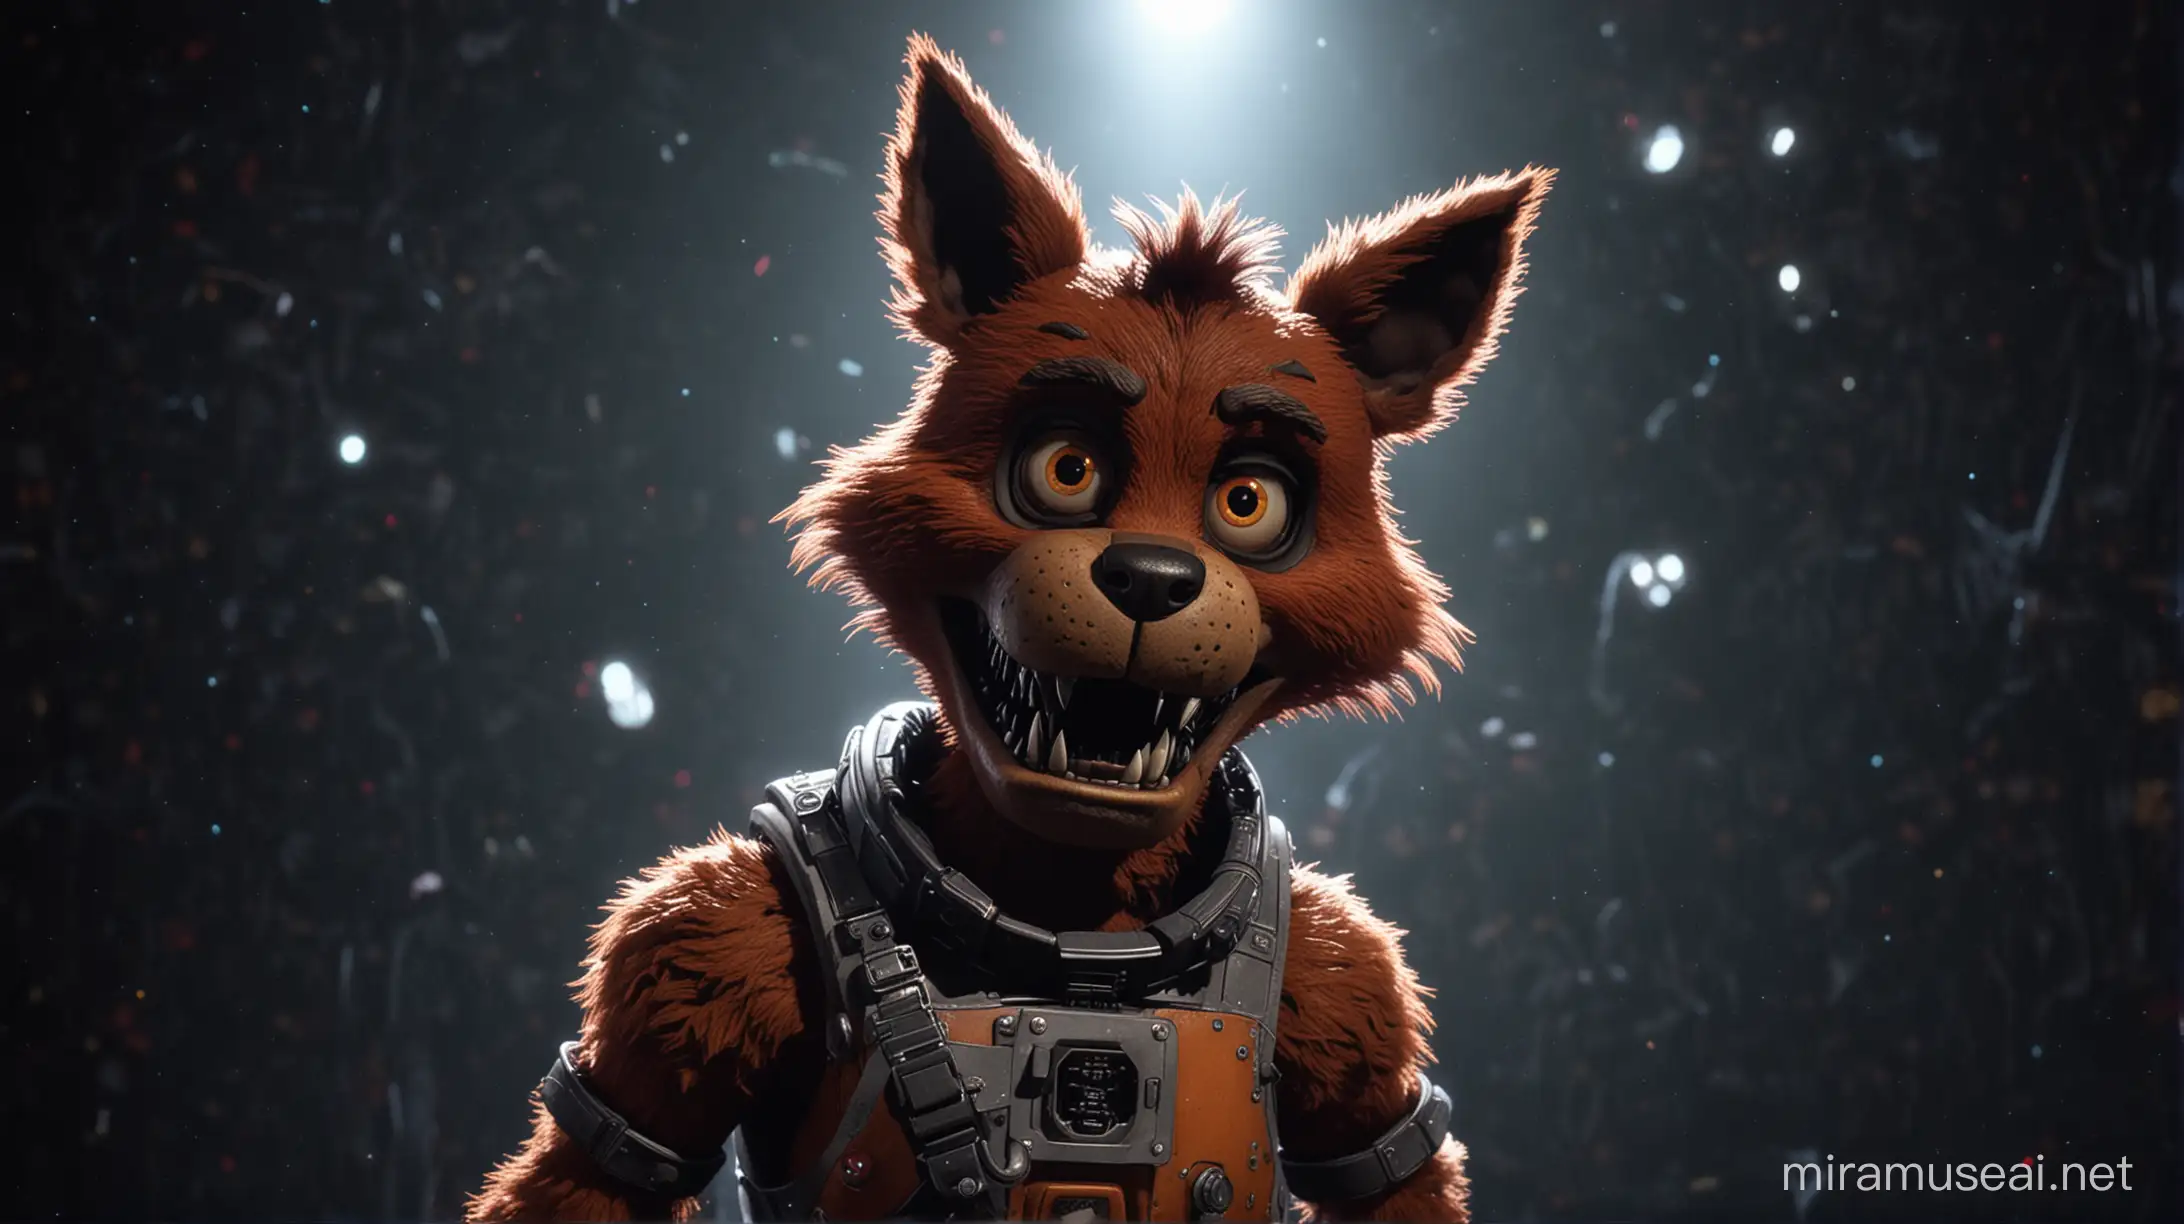 Realistic Foxy in Space Five Nights at Freddys Movie Inspired Art